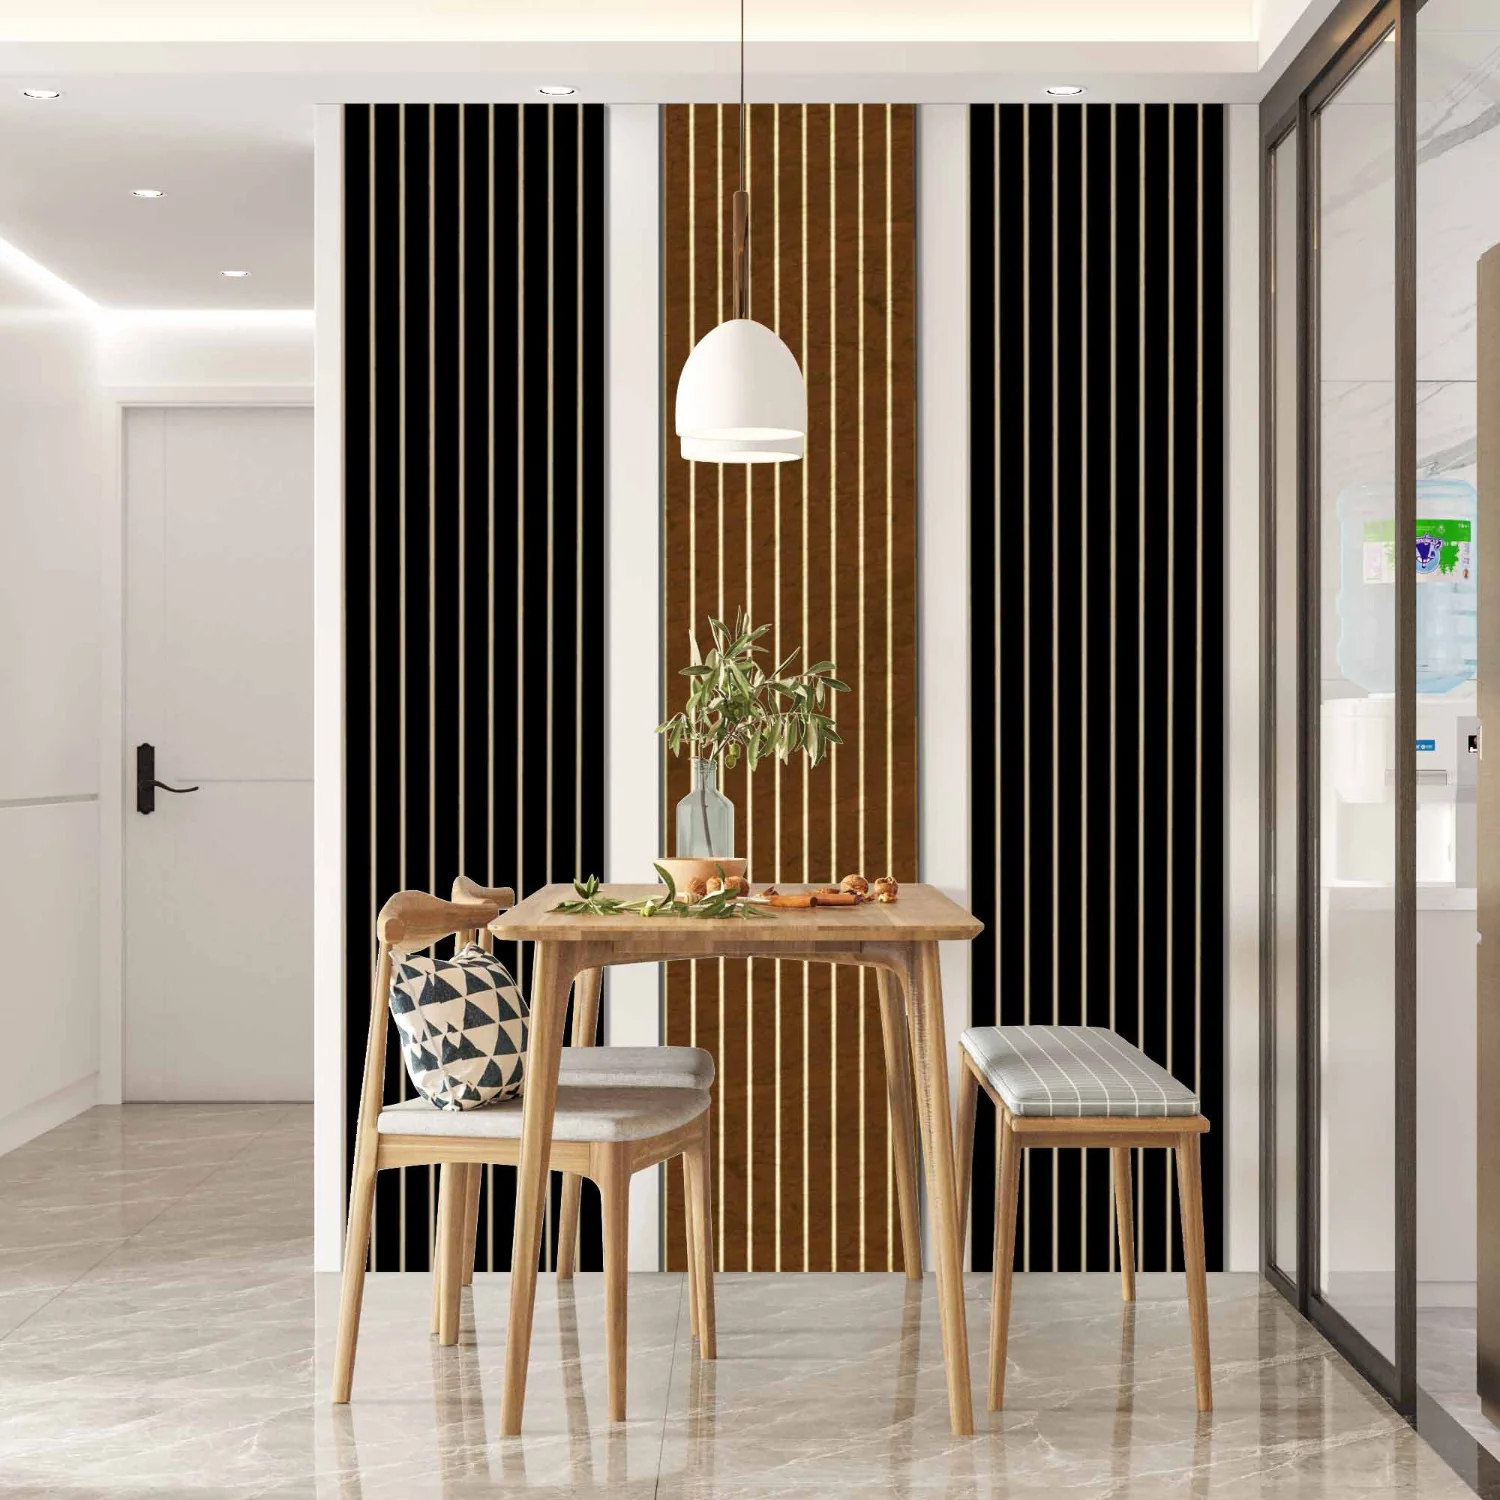 Mixed vertical wood slats for the dining room with exposed wall